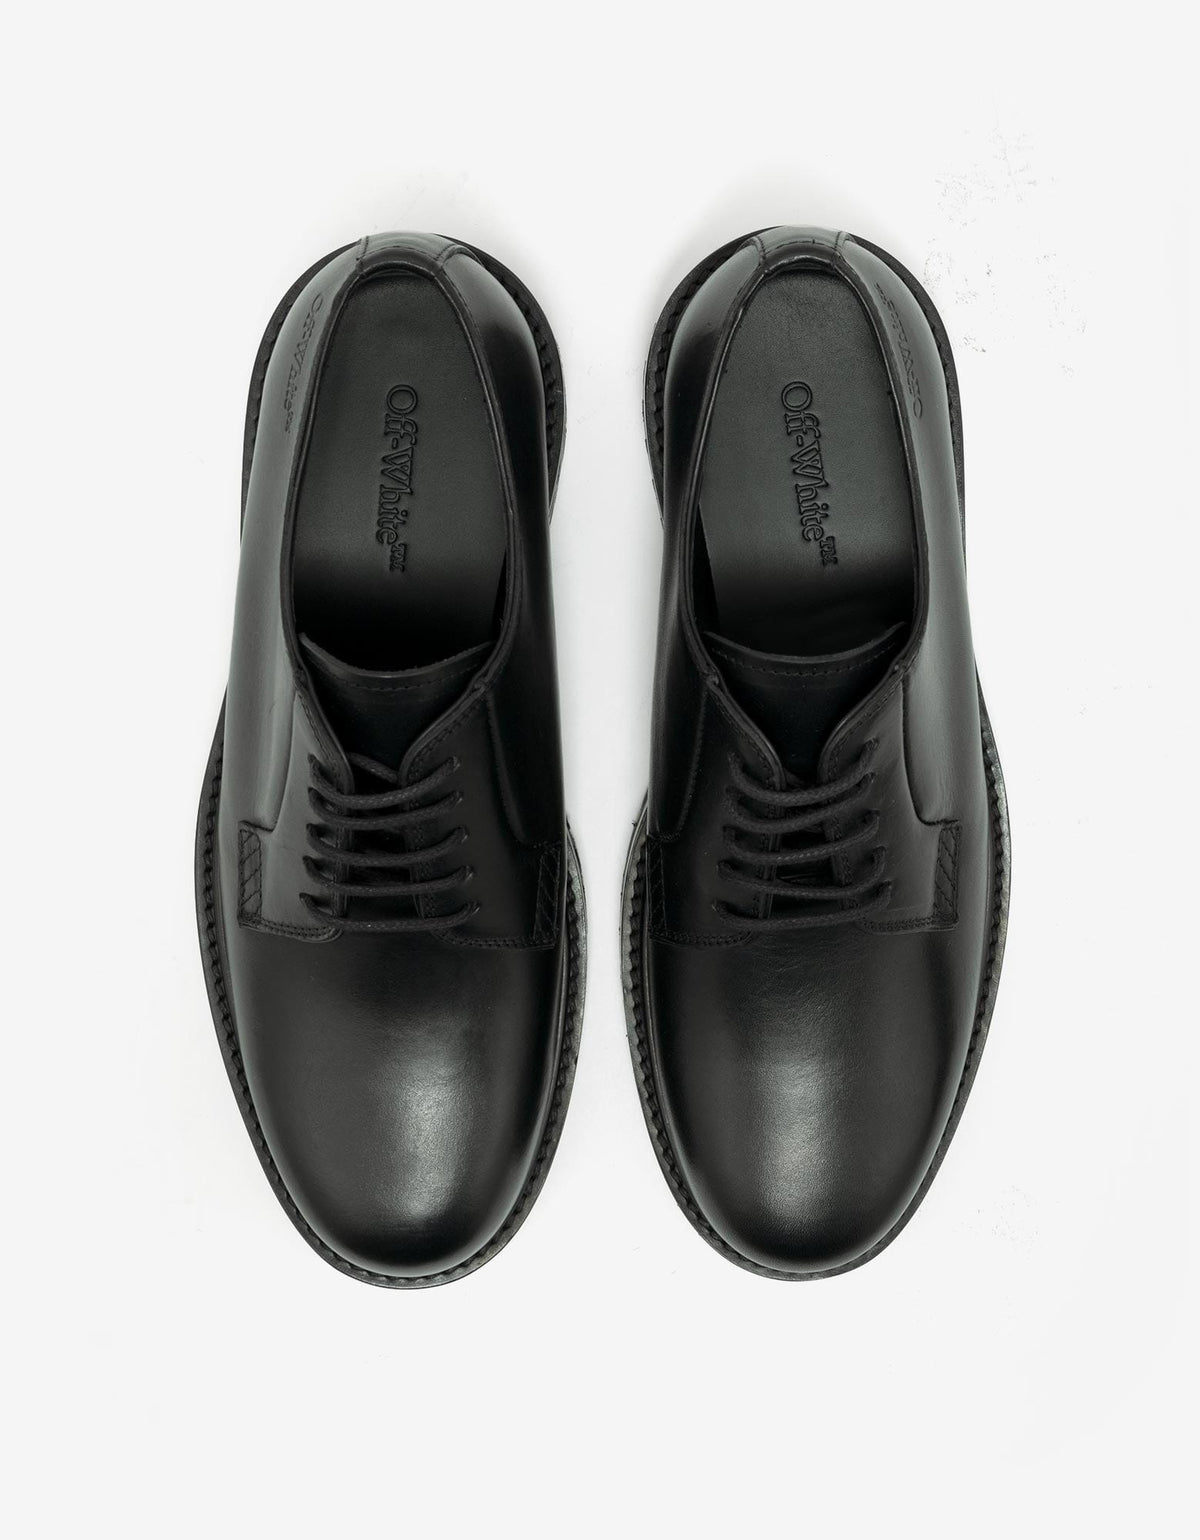 Off-White Black Military Derby Shoes